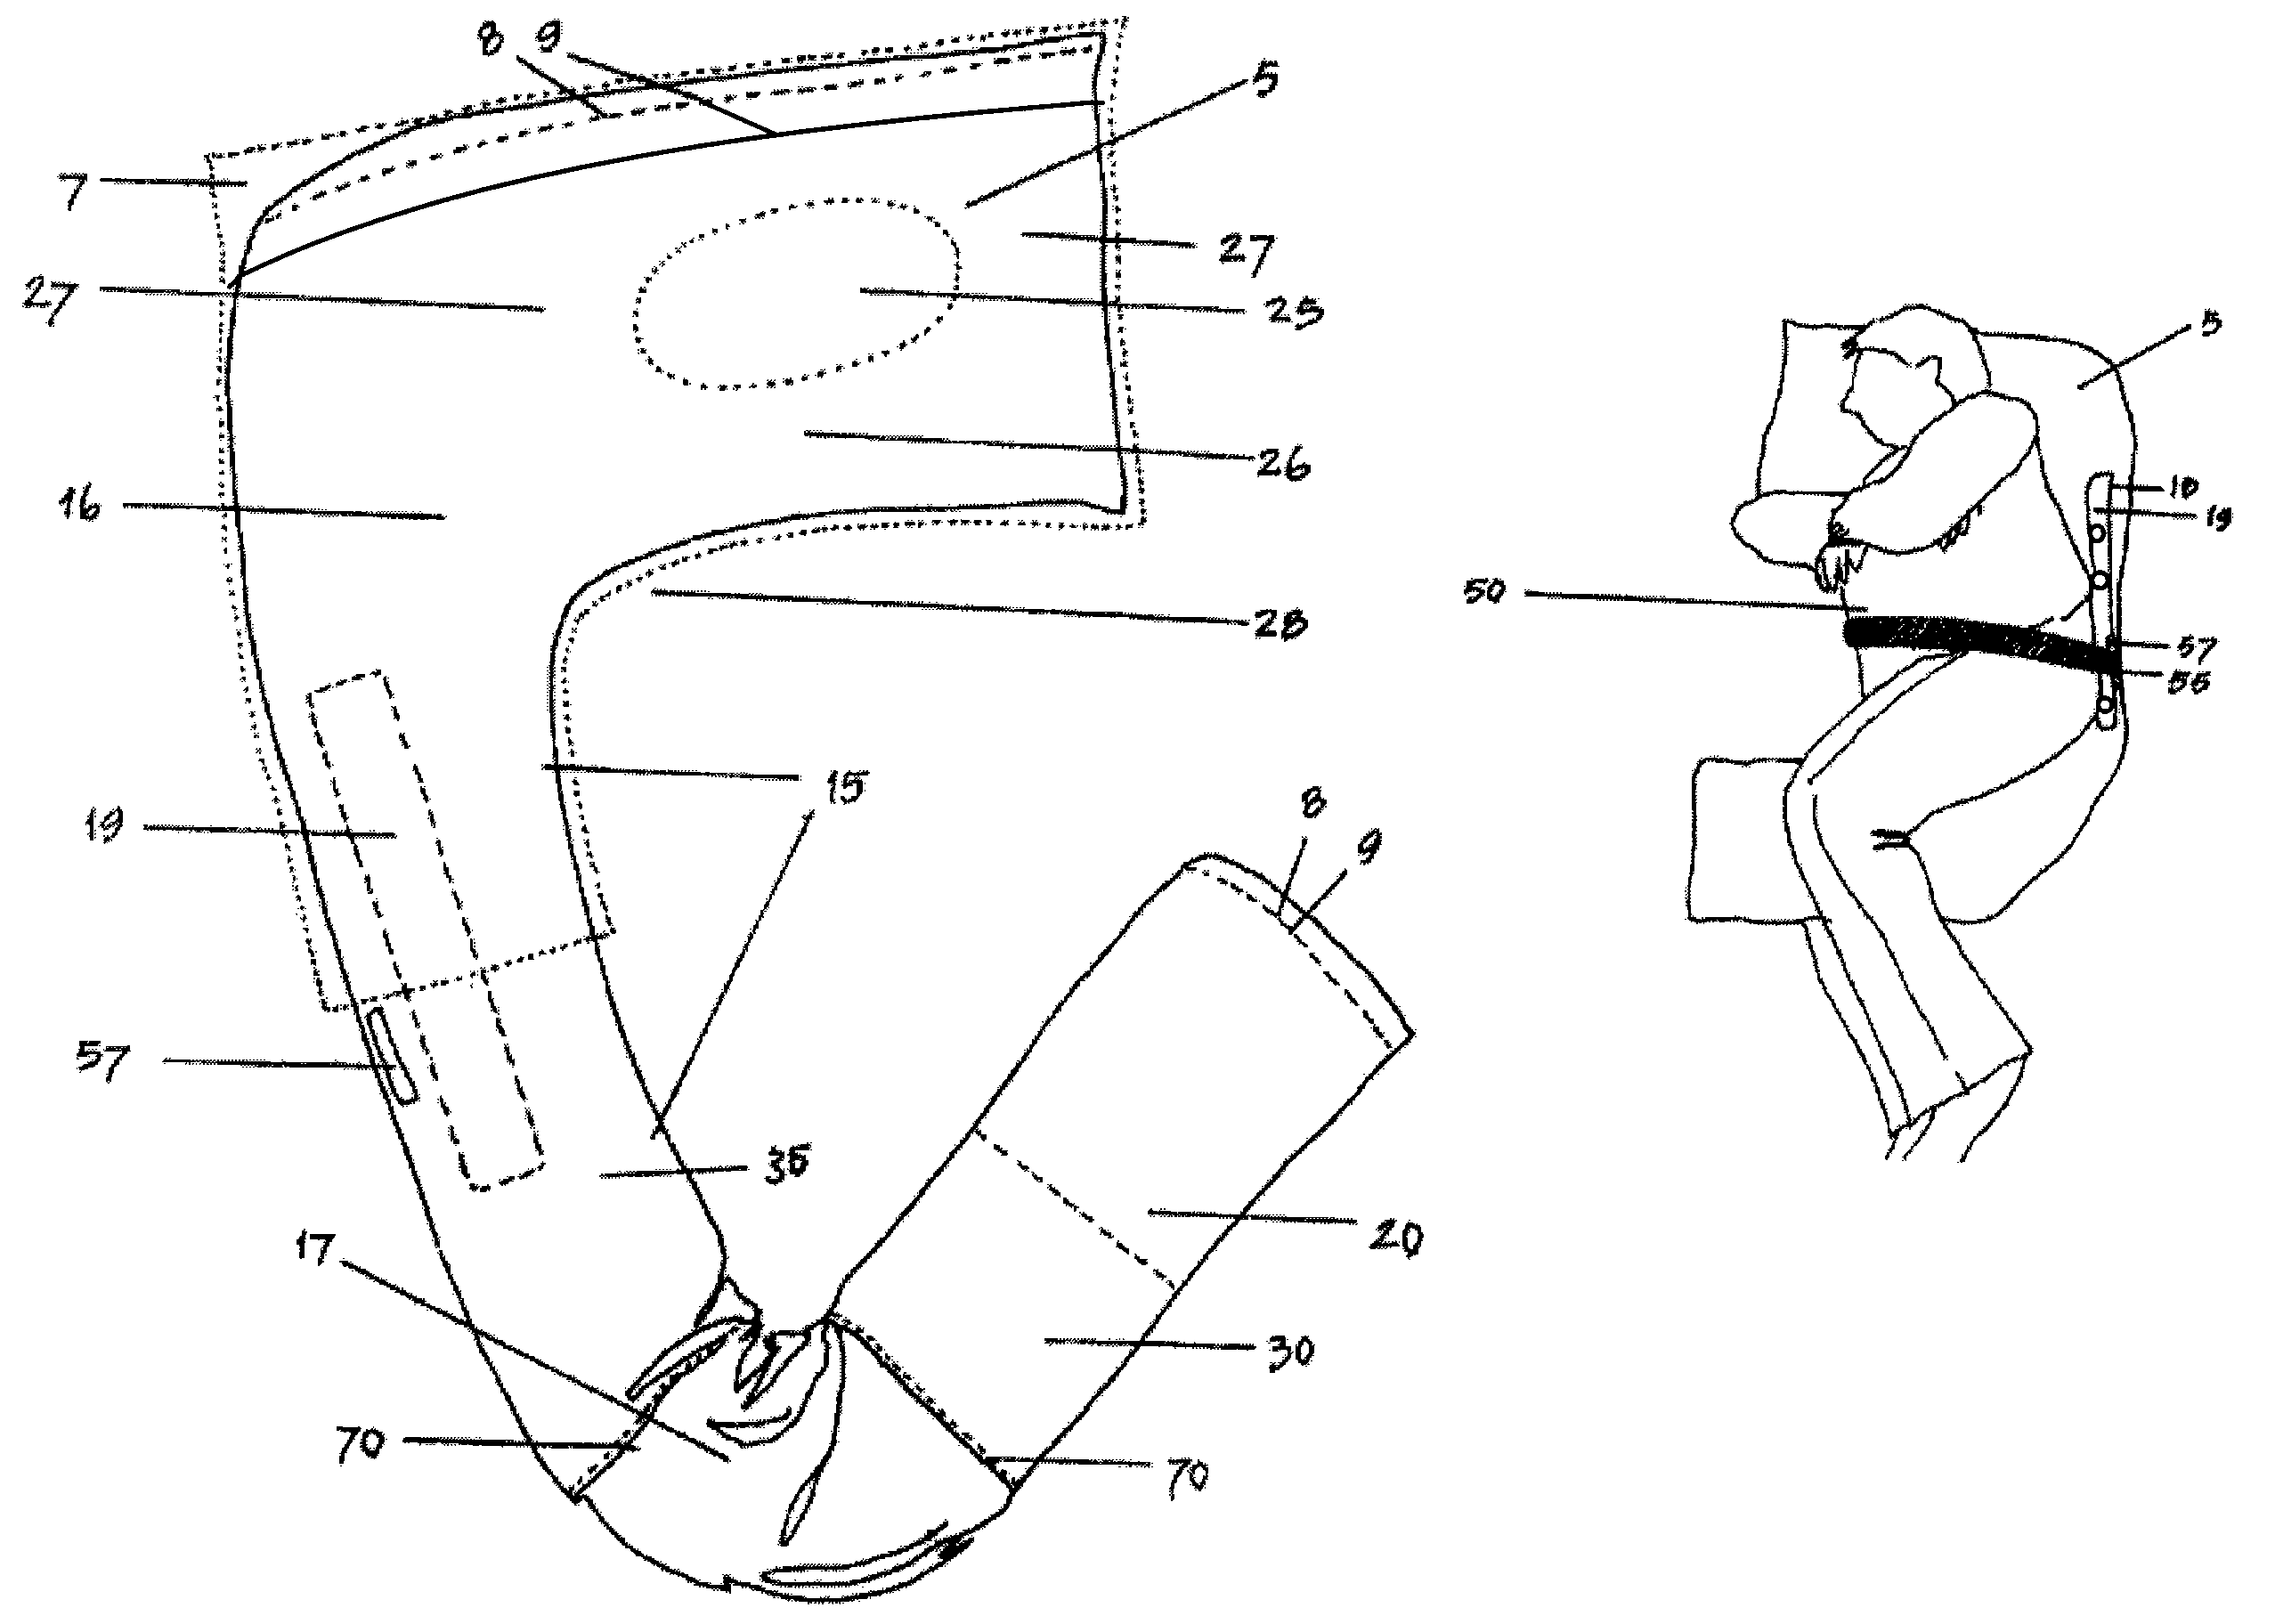 Therapeutic positioning device